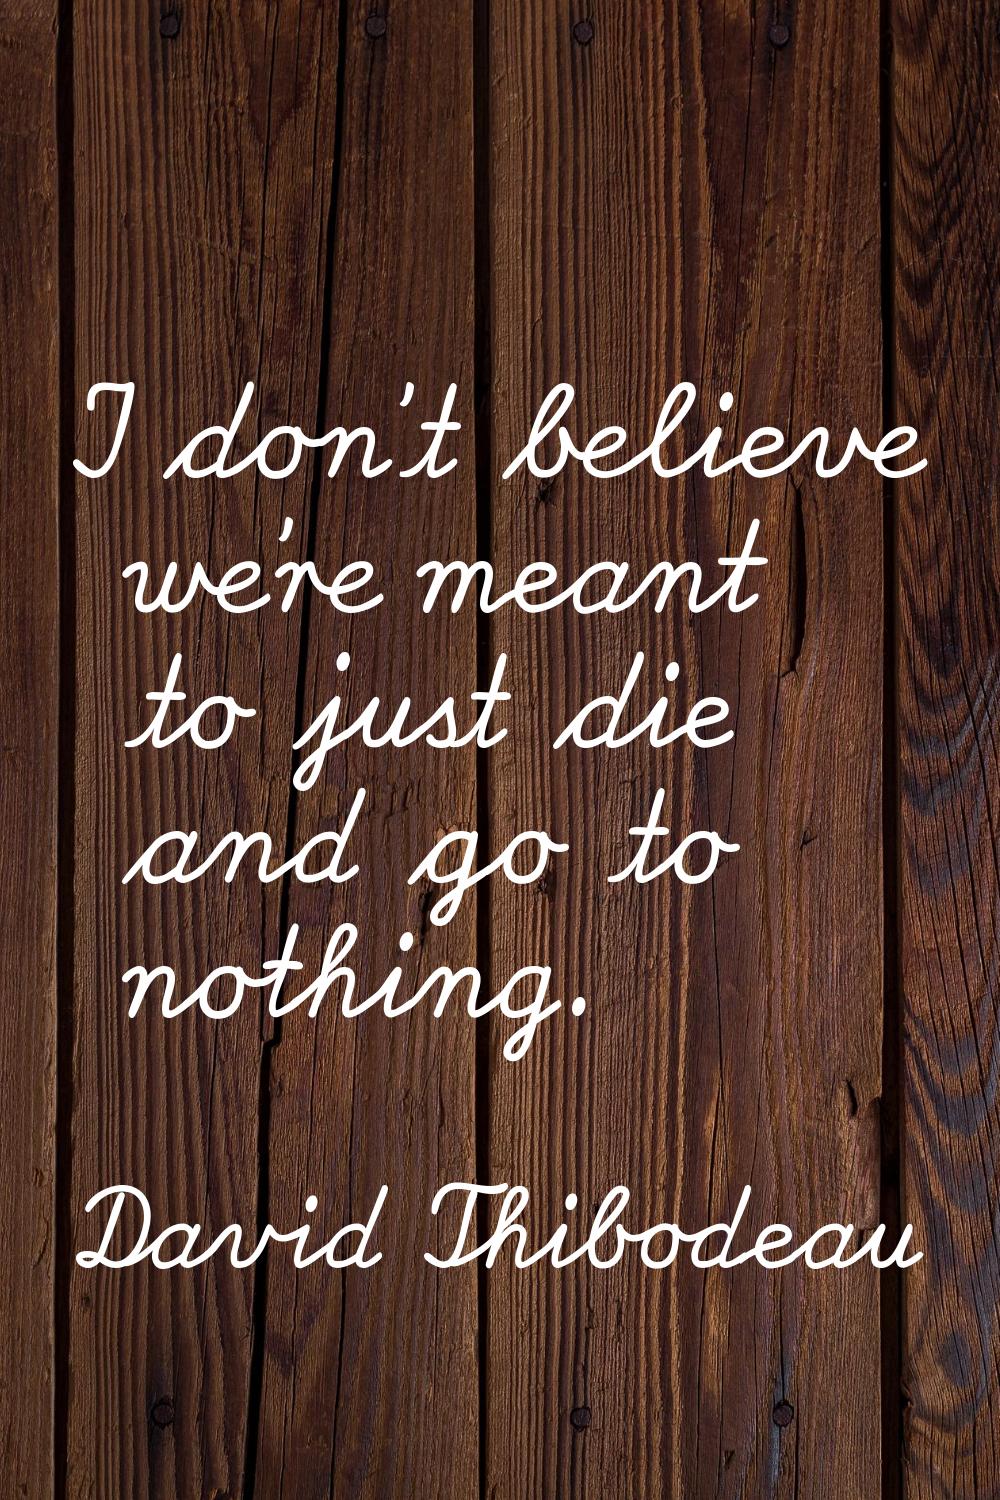 I don't believe we're meant to just die and go to nothing.